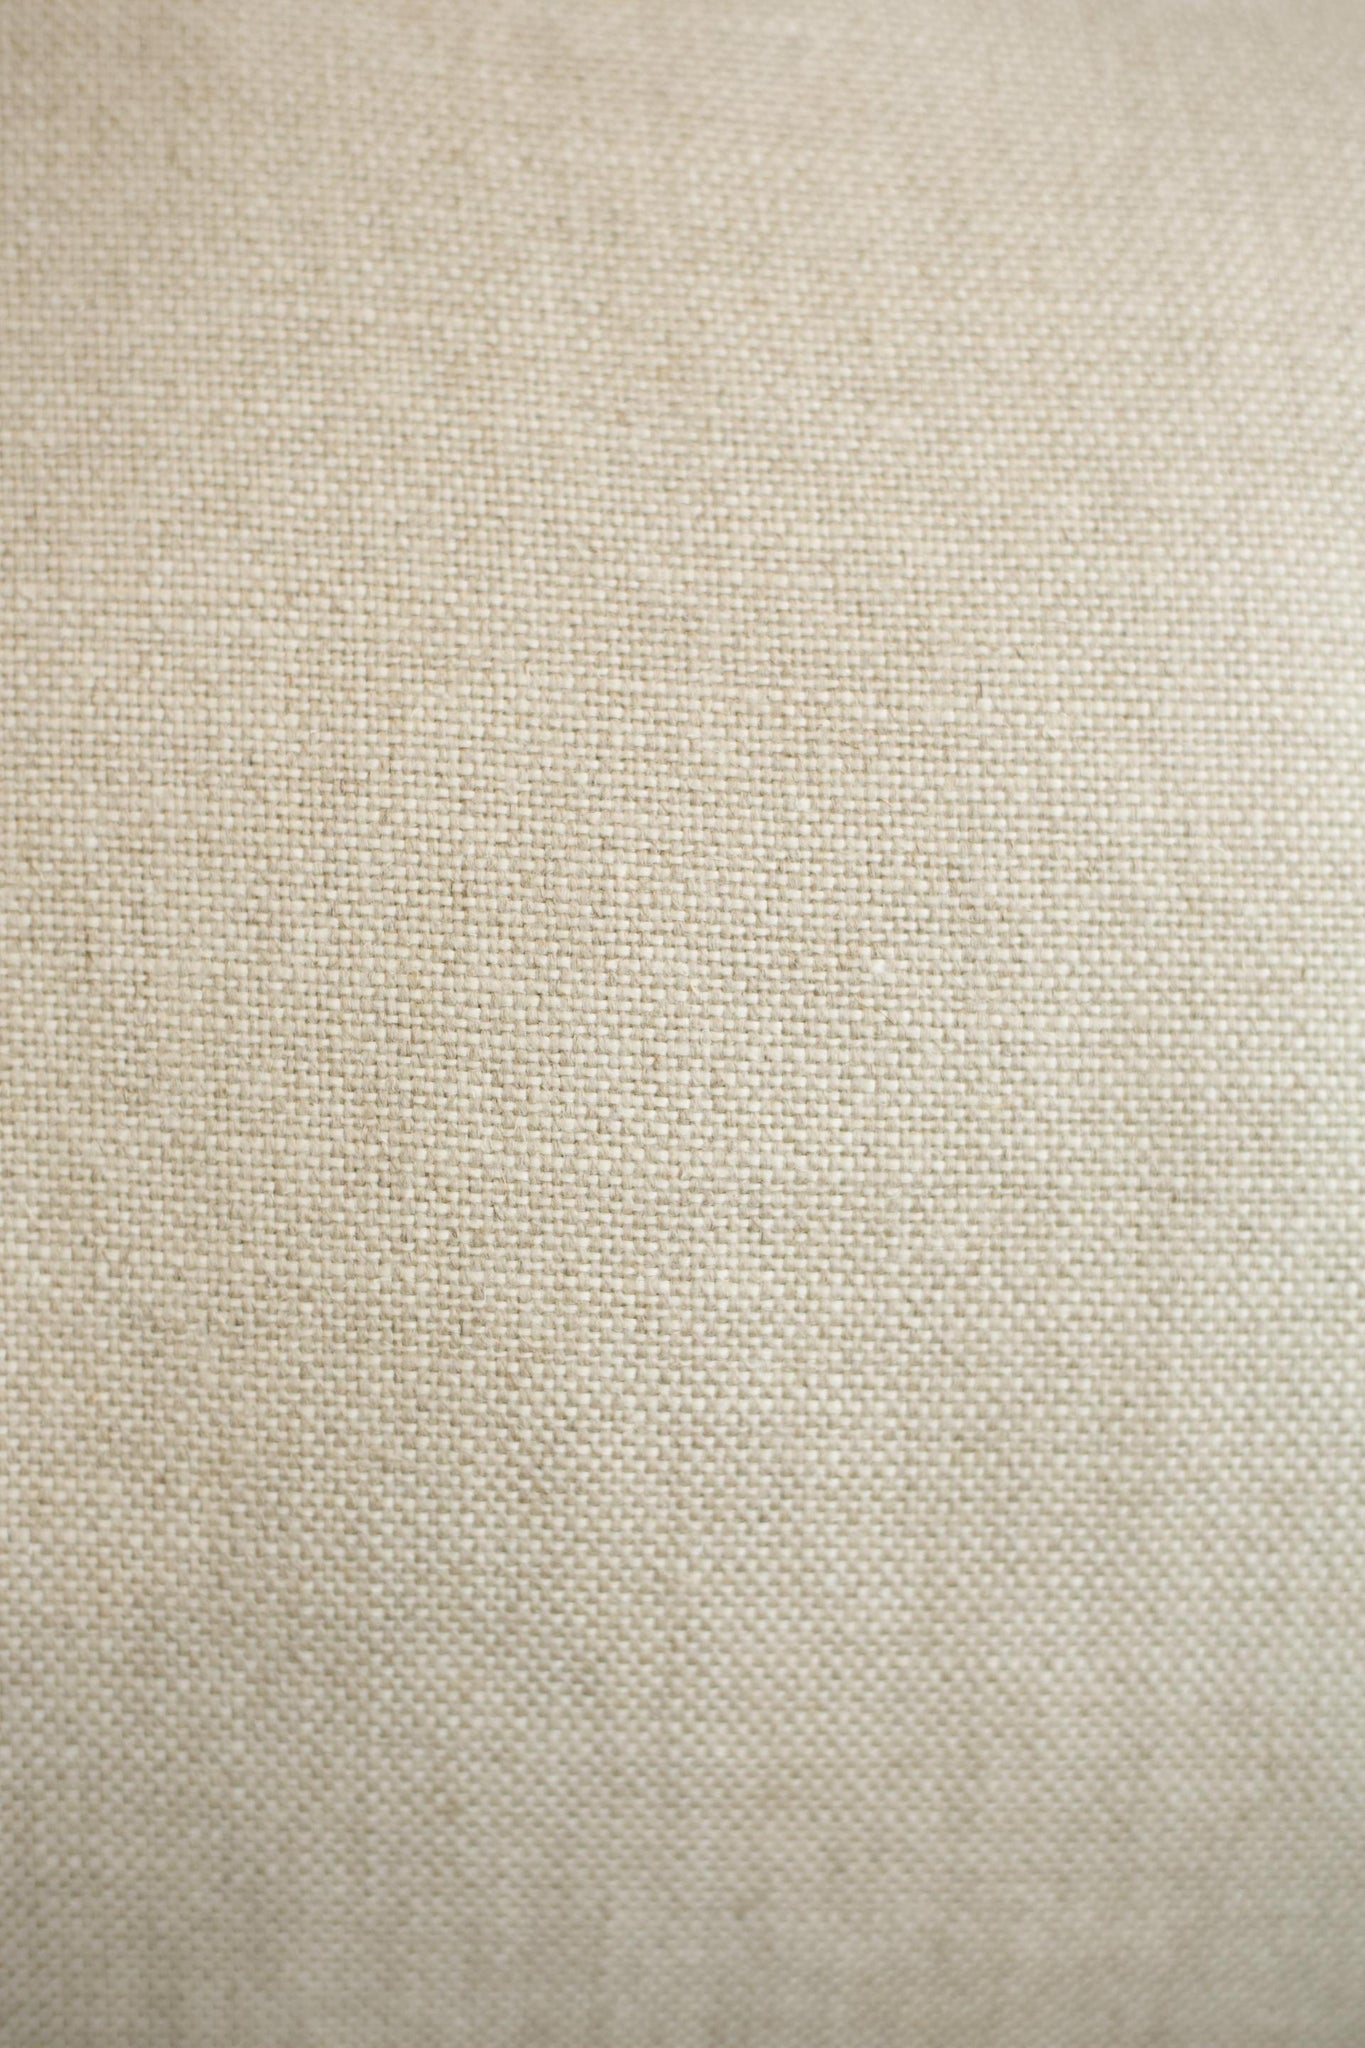 Flax linen scatter cushions - 18 inch